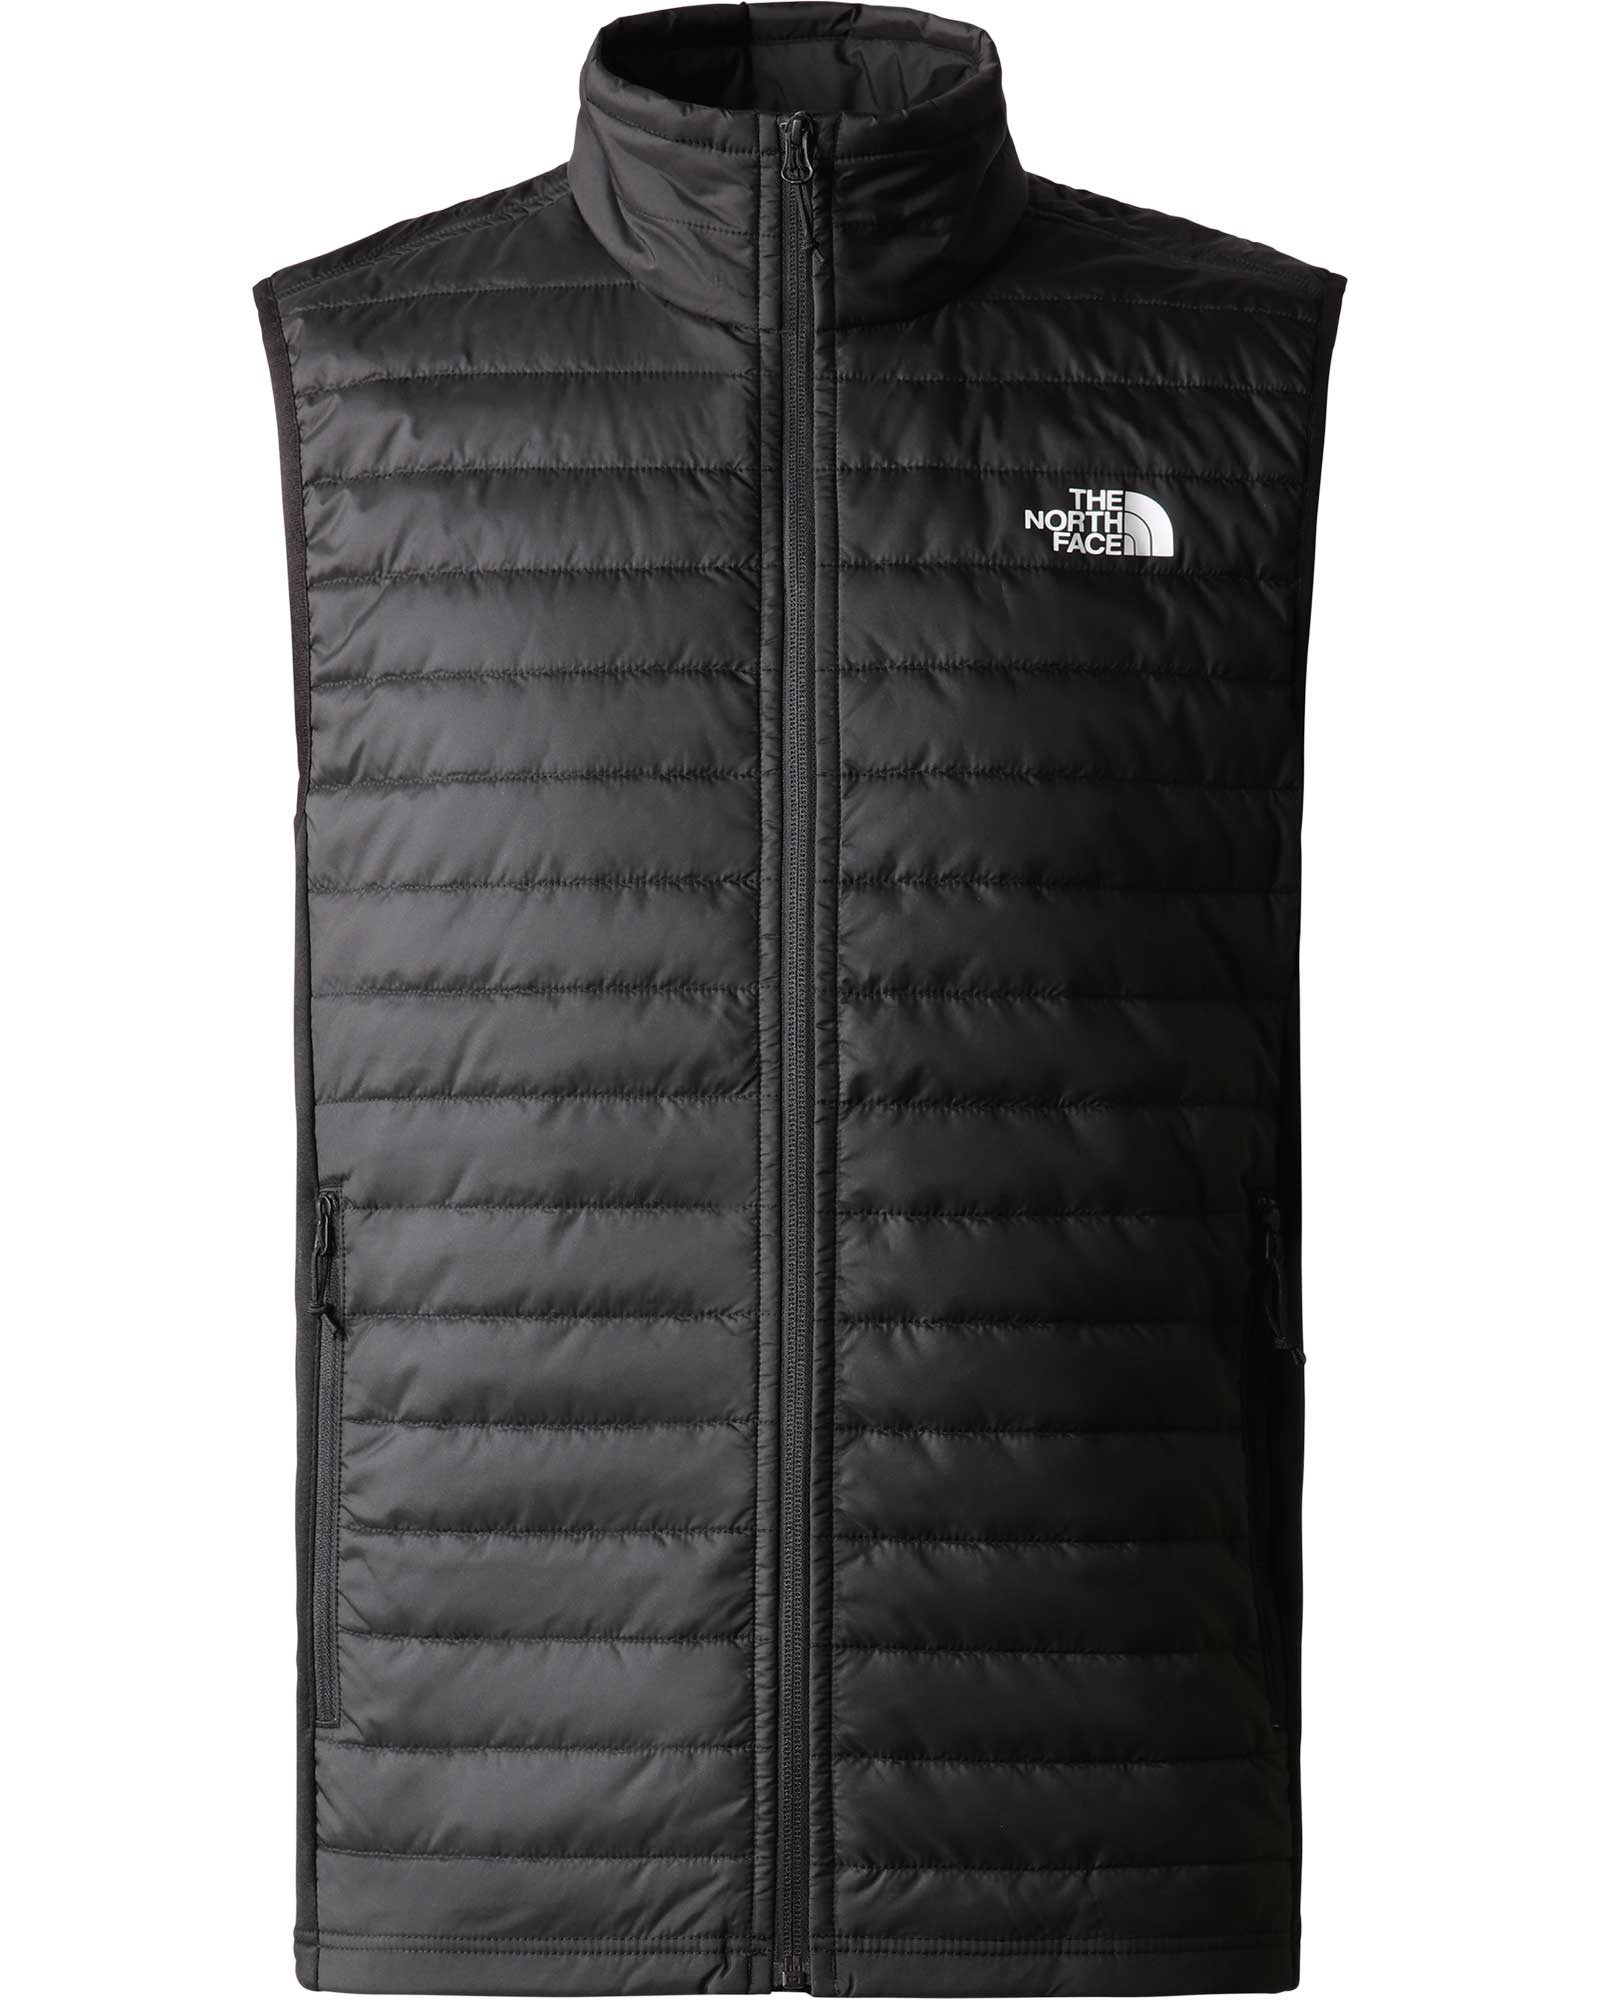 The North Face Canyonlands Hybrid Mens Vest